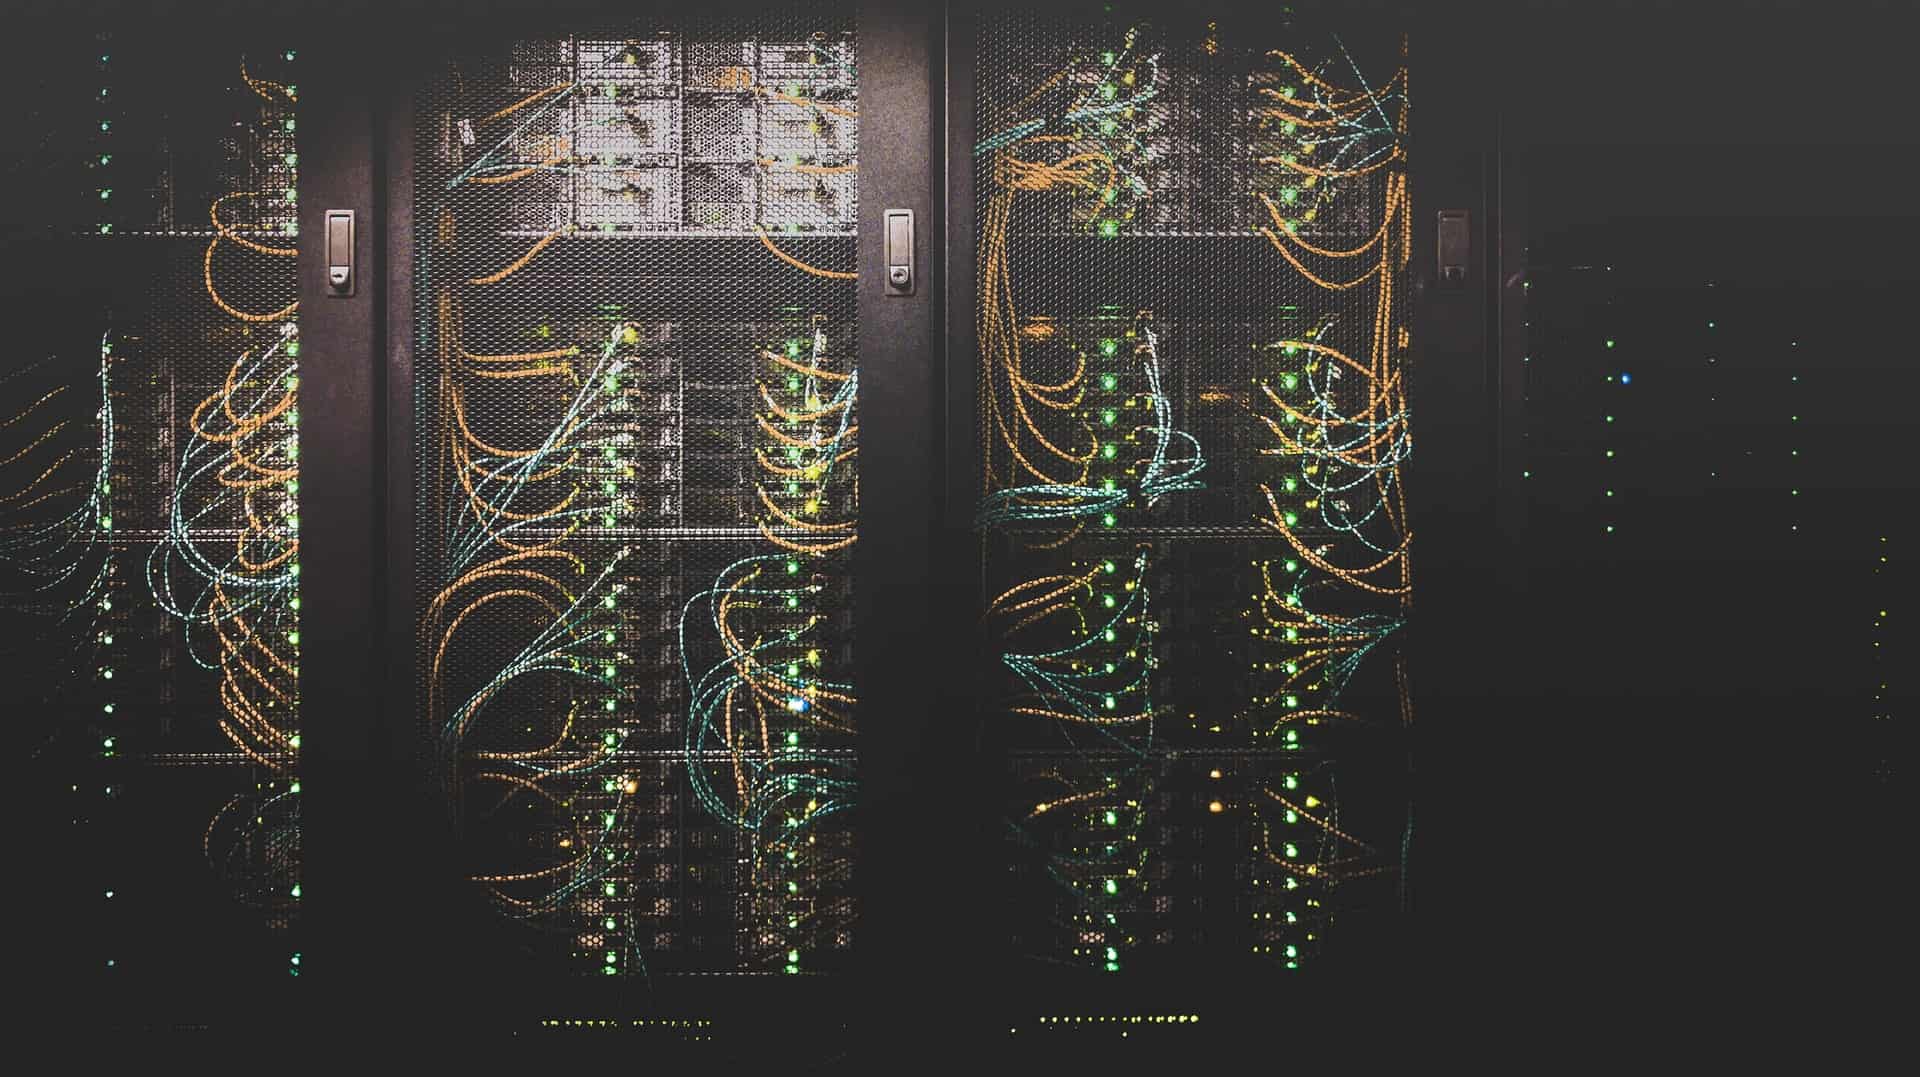 Server racks, used to store the growing amount of data we collect.